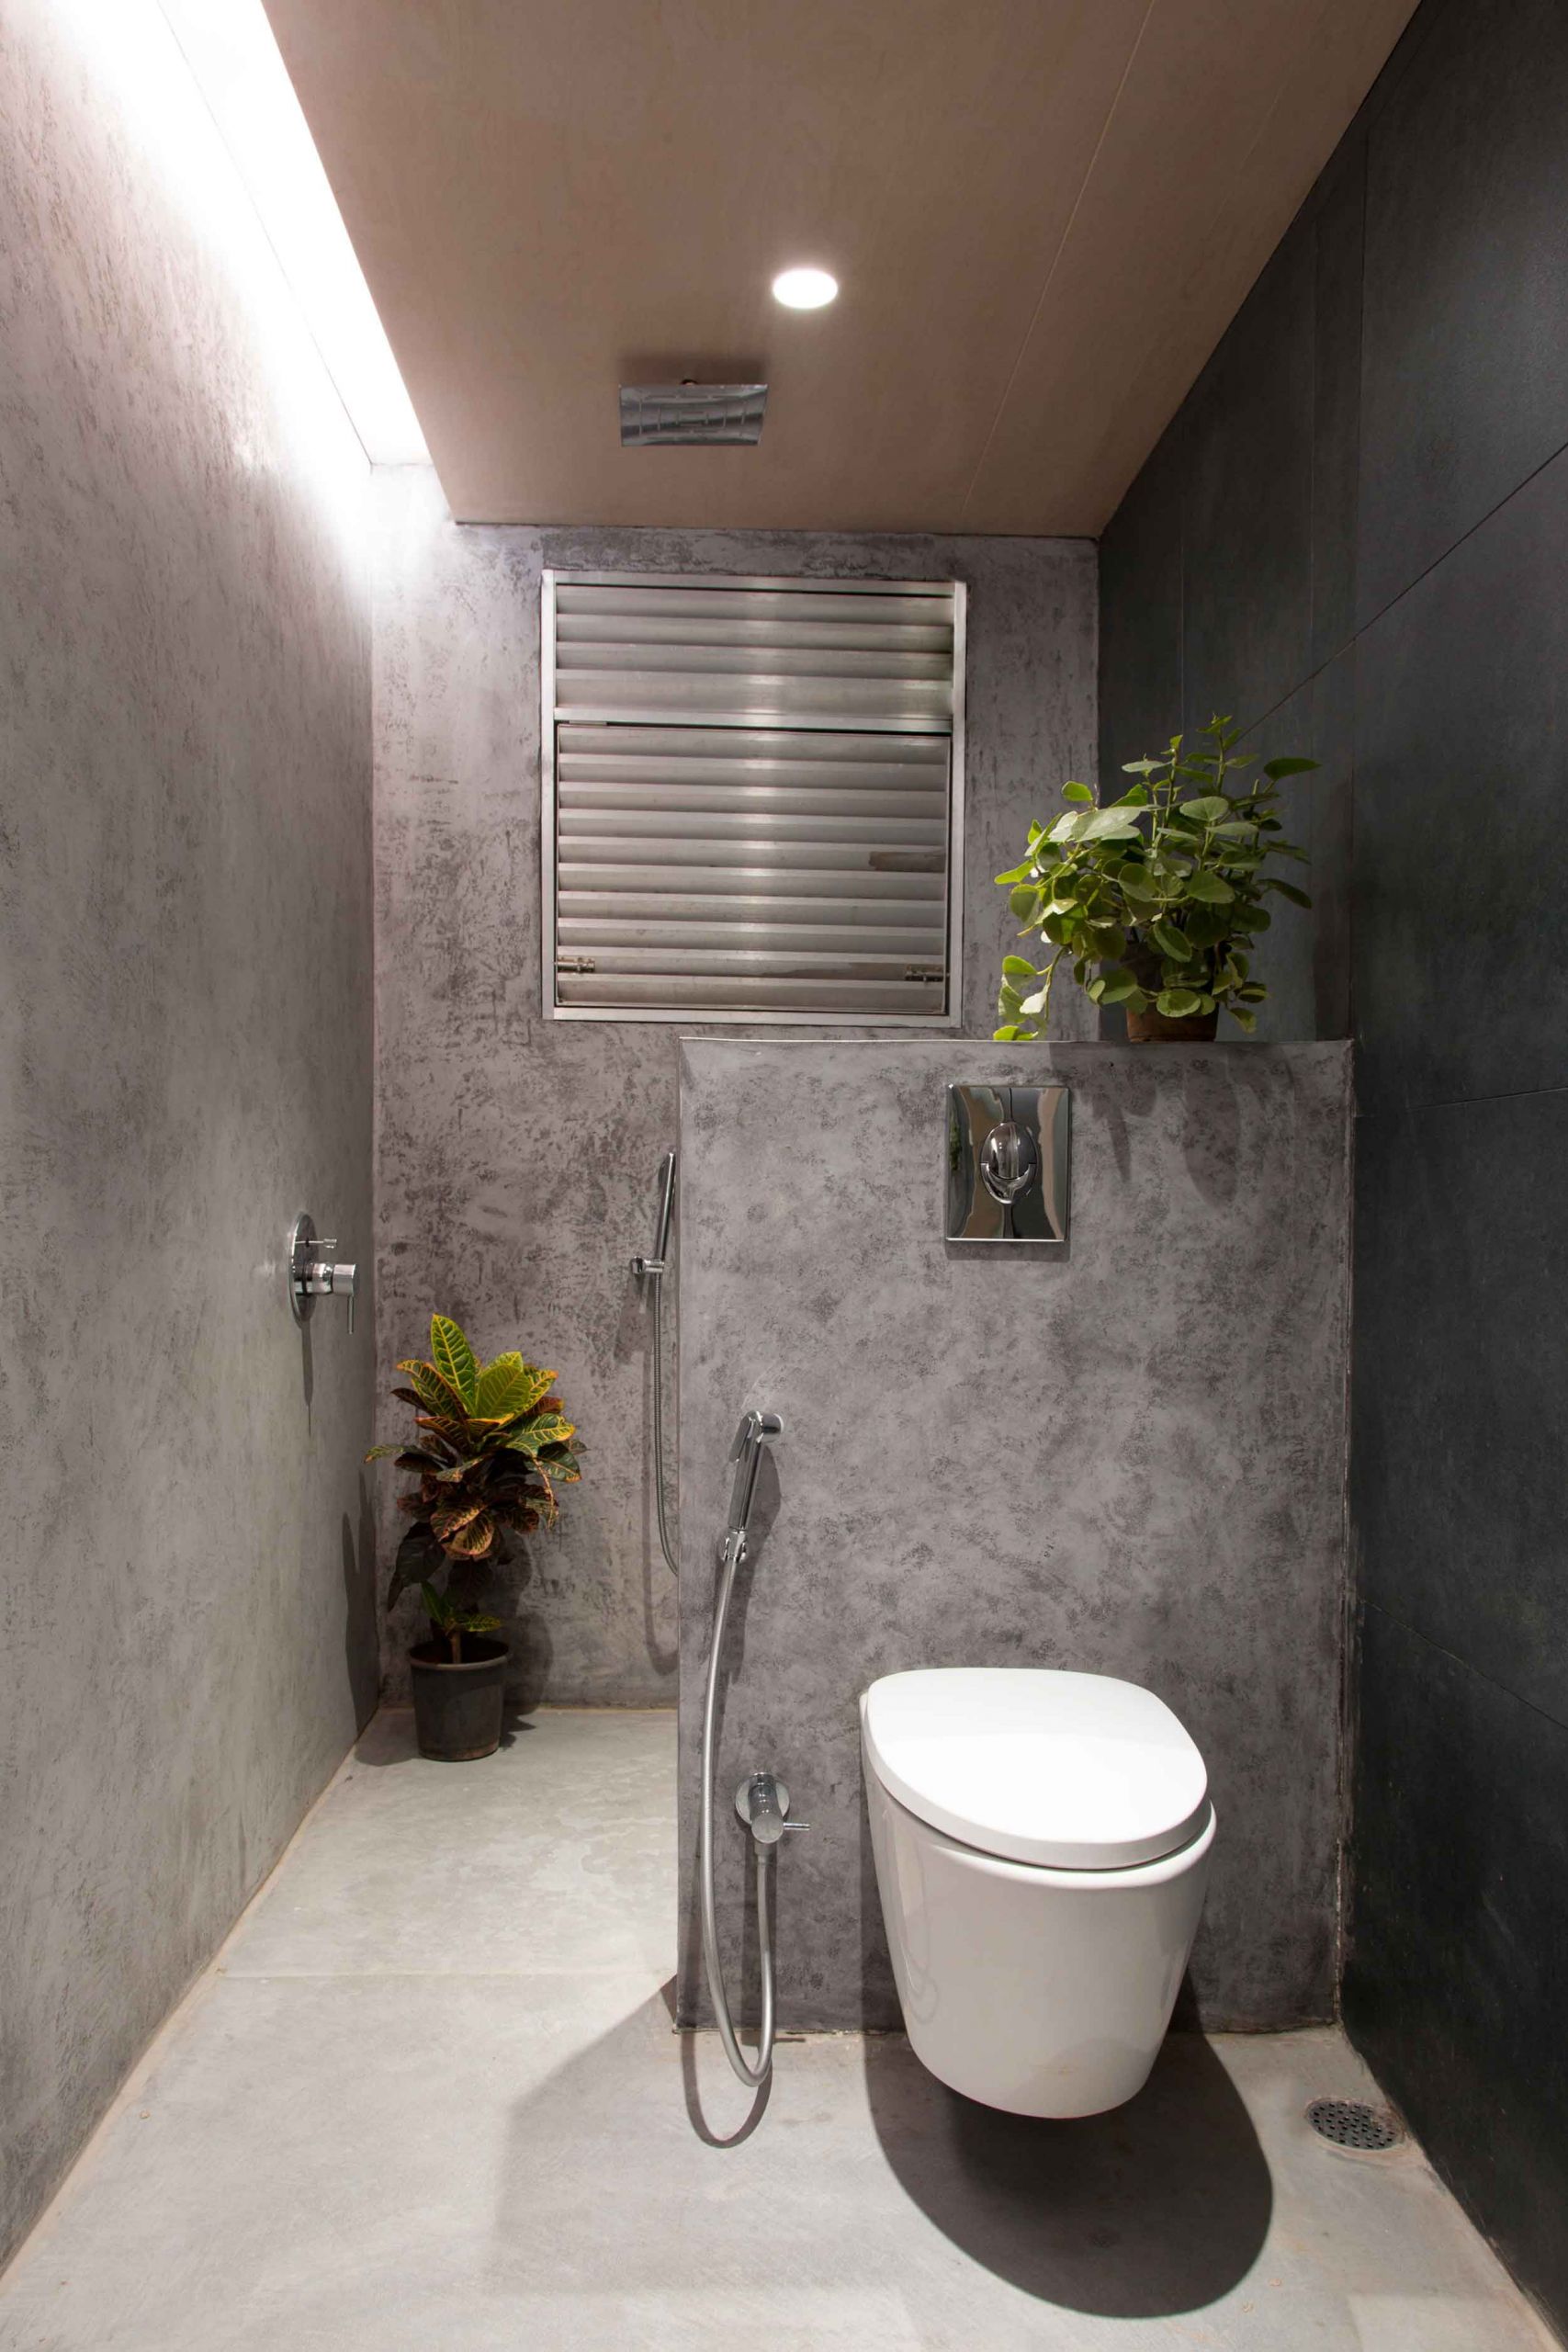 Design For Bathroom
 Bathroom Designs in India Top 10 spaces featured on AD